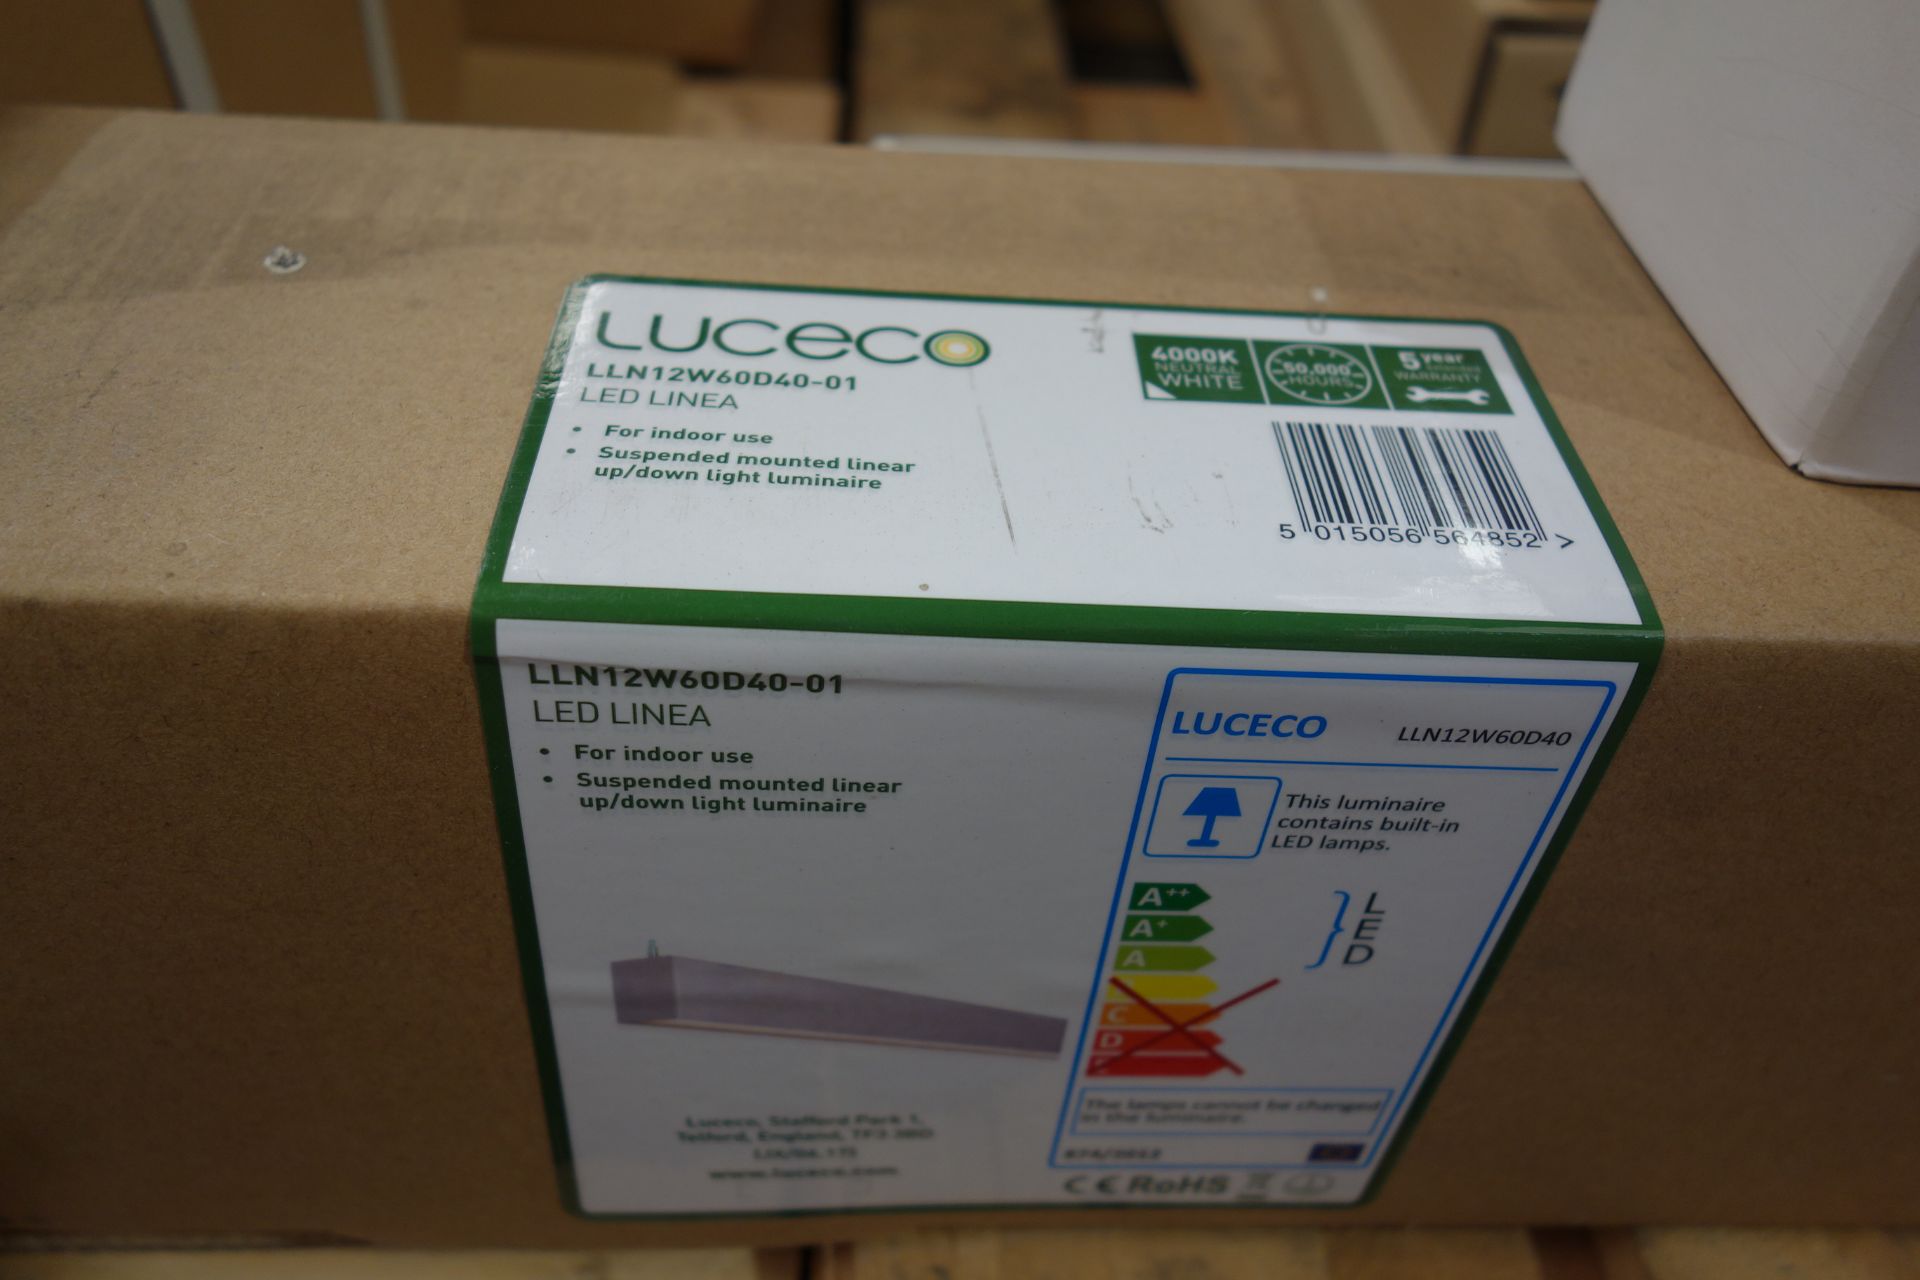 8 X Luceco LLN12W60D40-01 LED Linea For Indoor Use Suspended Mounted Linea UP/DOWN Light Luminaire